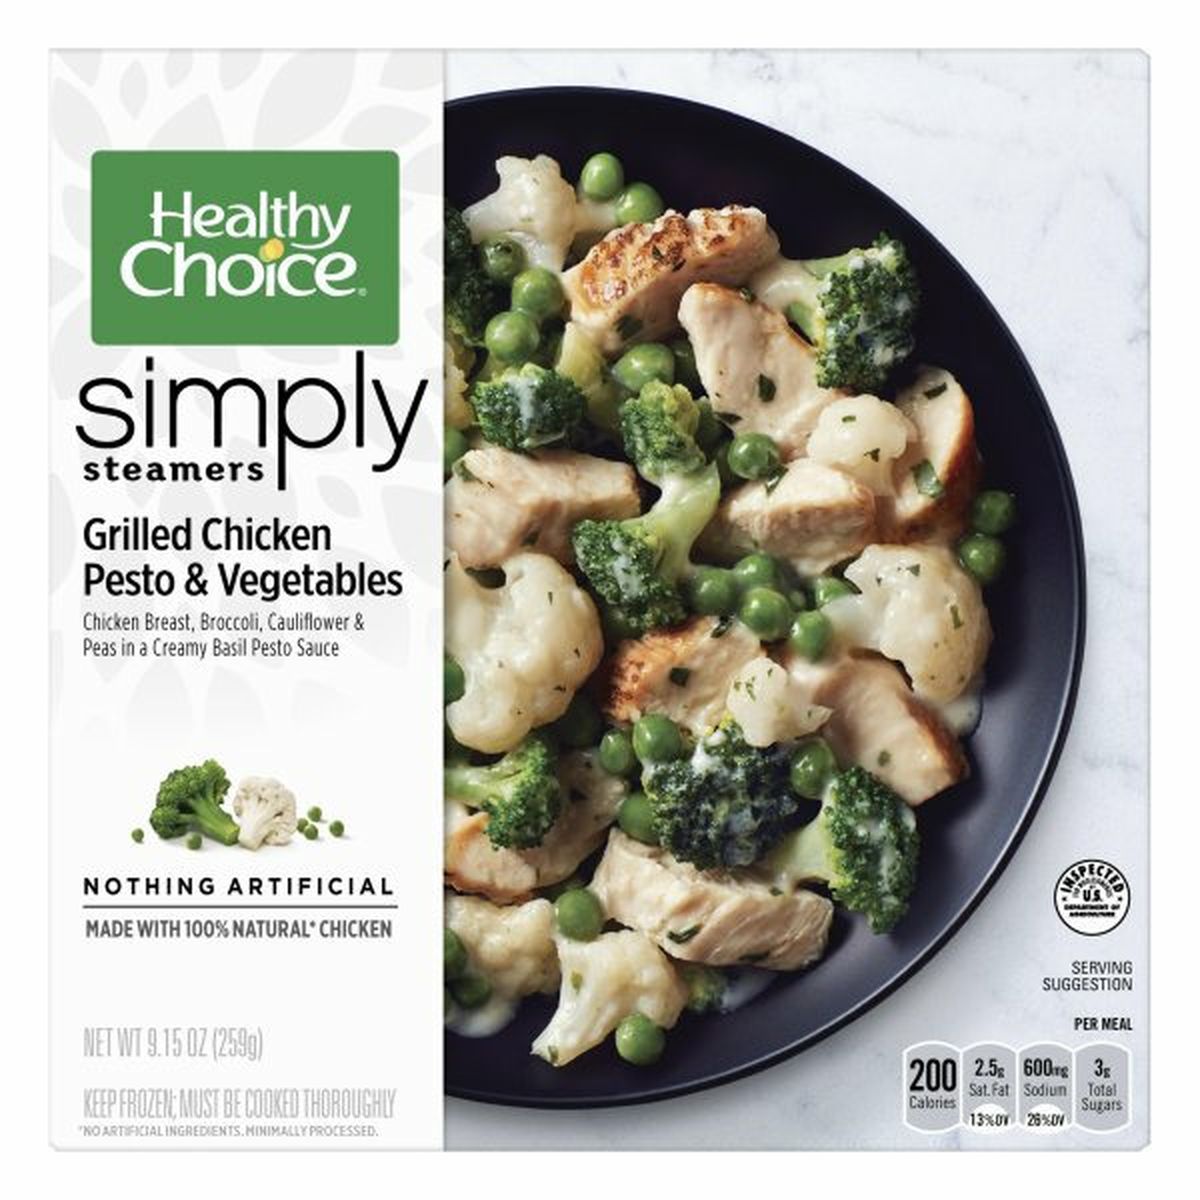 Calories in Healthy Choice Simply Steamers Grilled Chicken Pesto & Vegetables